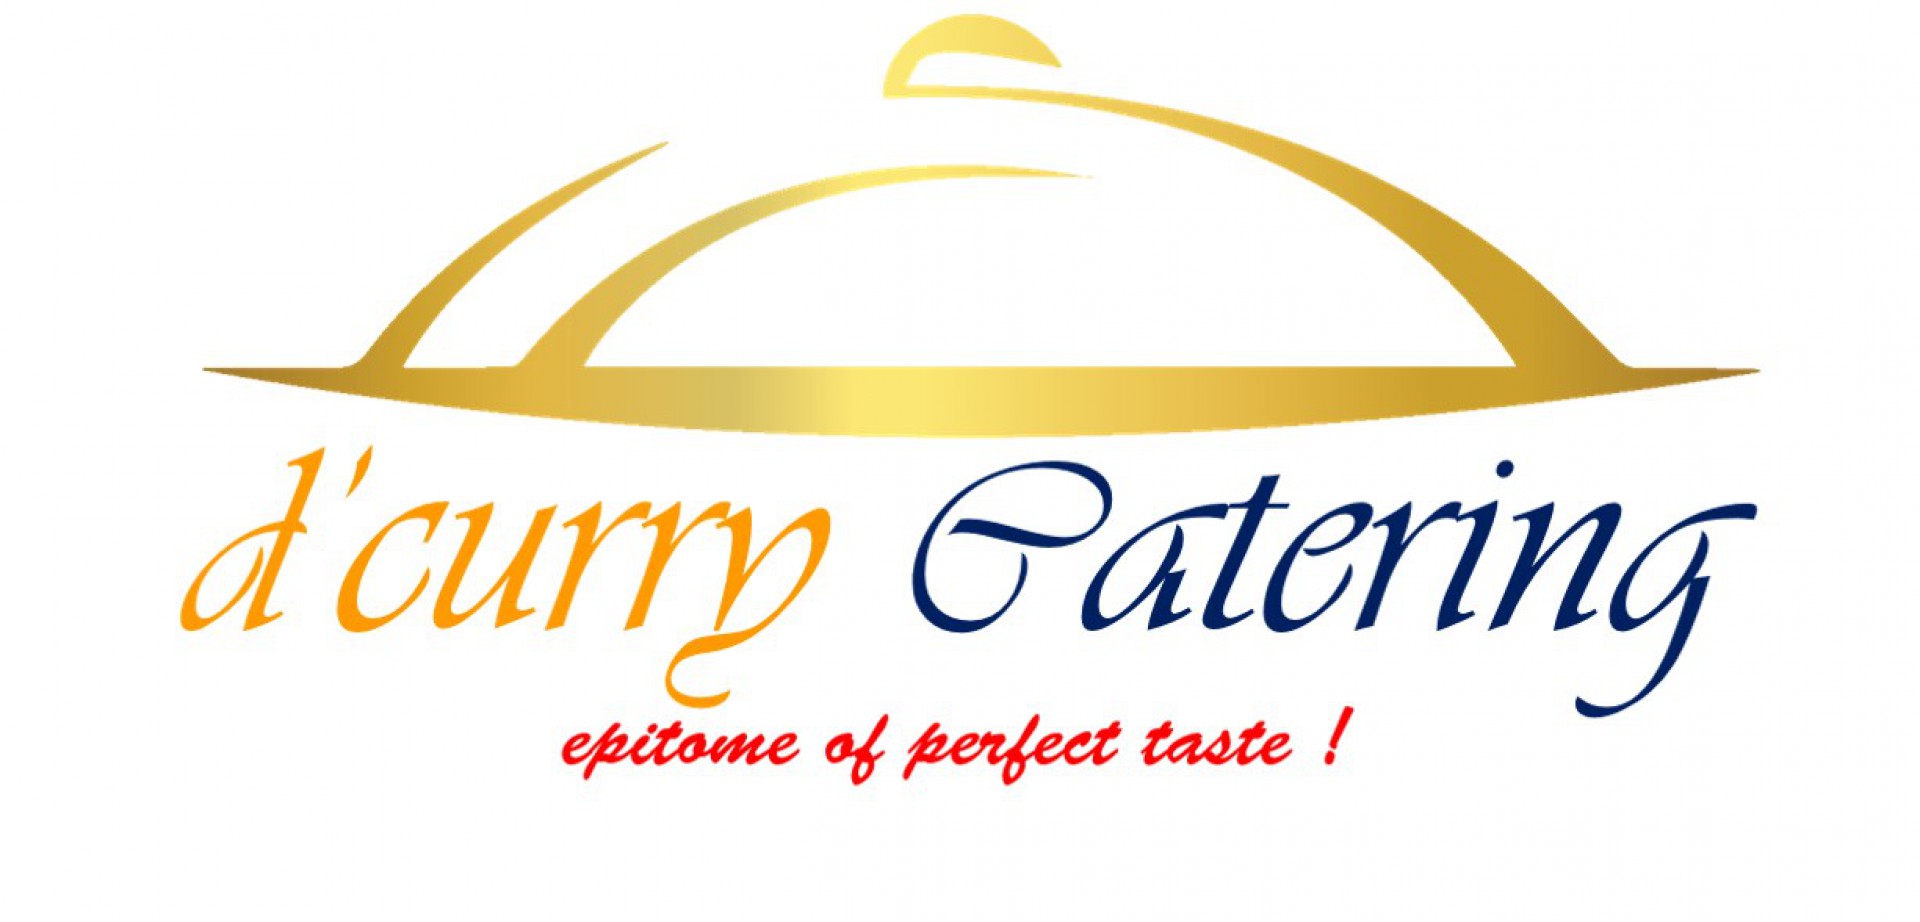 D'Curry Catering